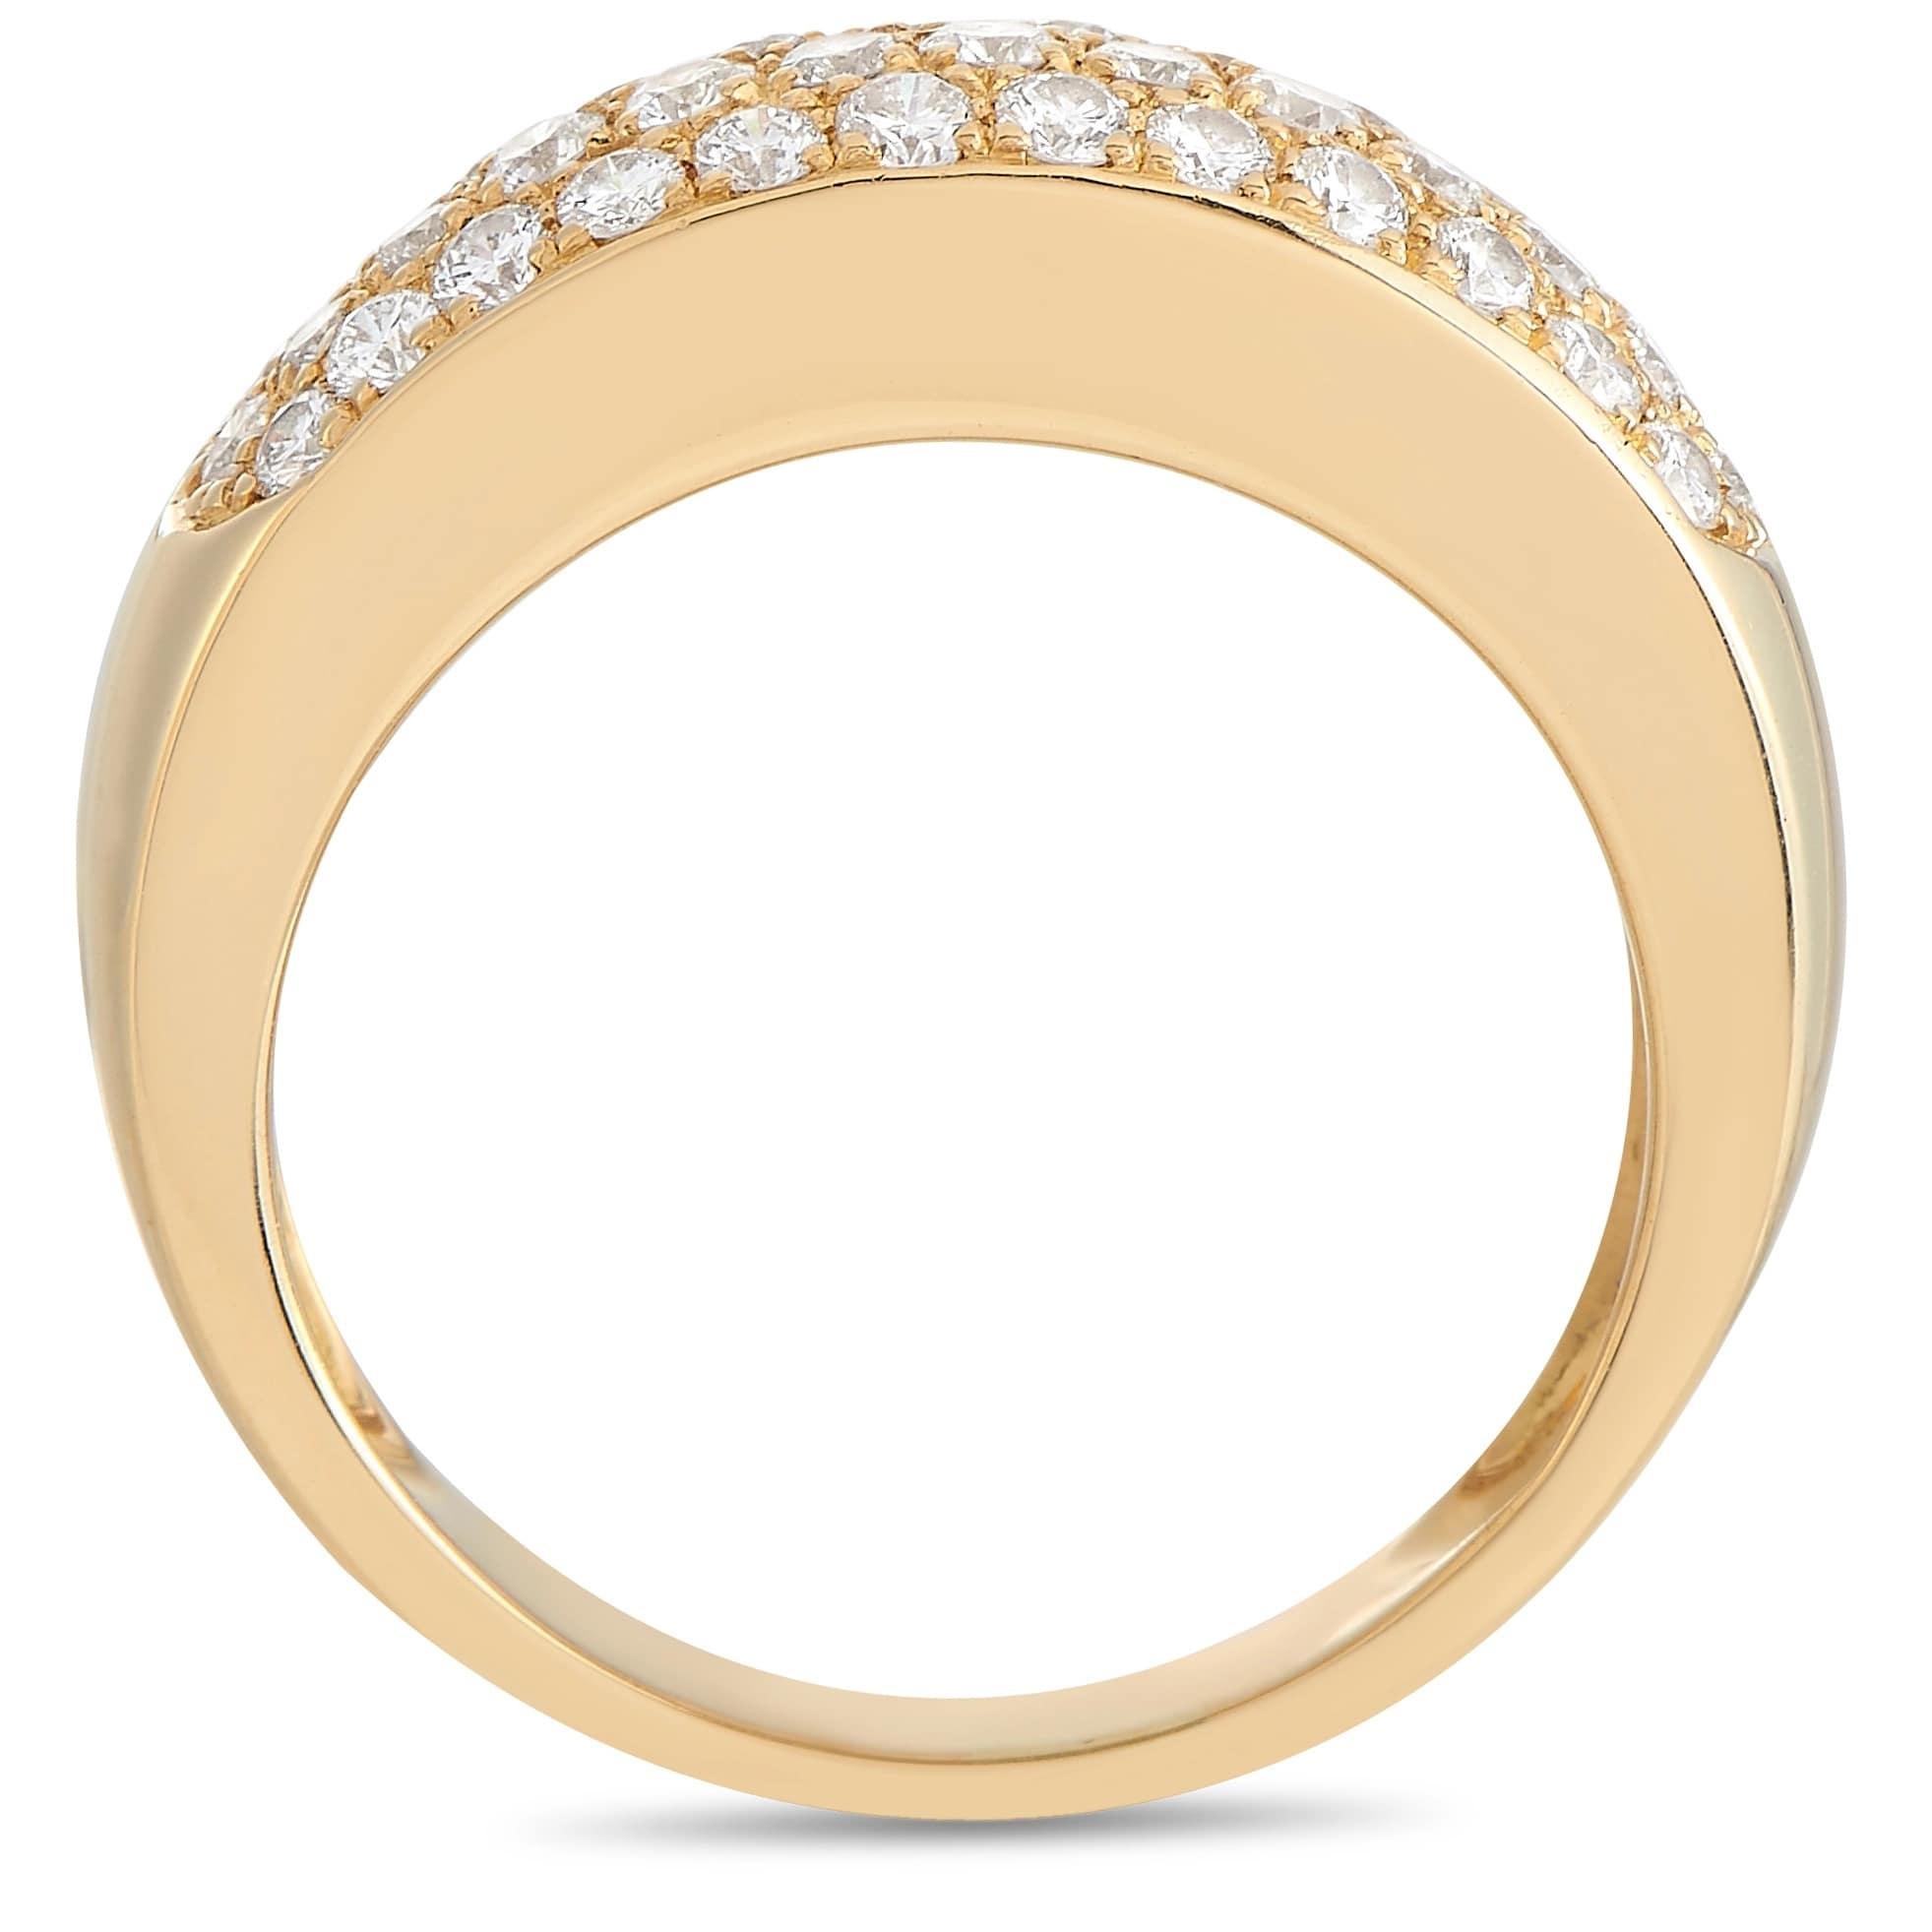 Sleek and simple, this exquisite Van Cleef & Arpels ring will become an instant classic. A smooth setting crafted from 18K yellow gold contrasts beautifully against three rows of shimmering diamonds with E color and VVS clarity, which together total